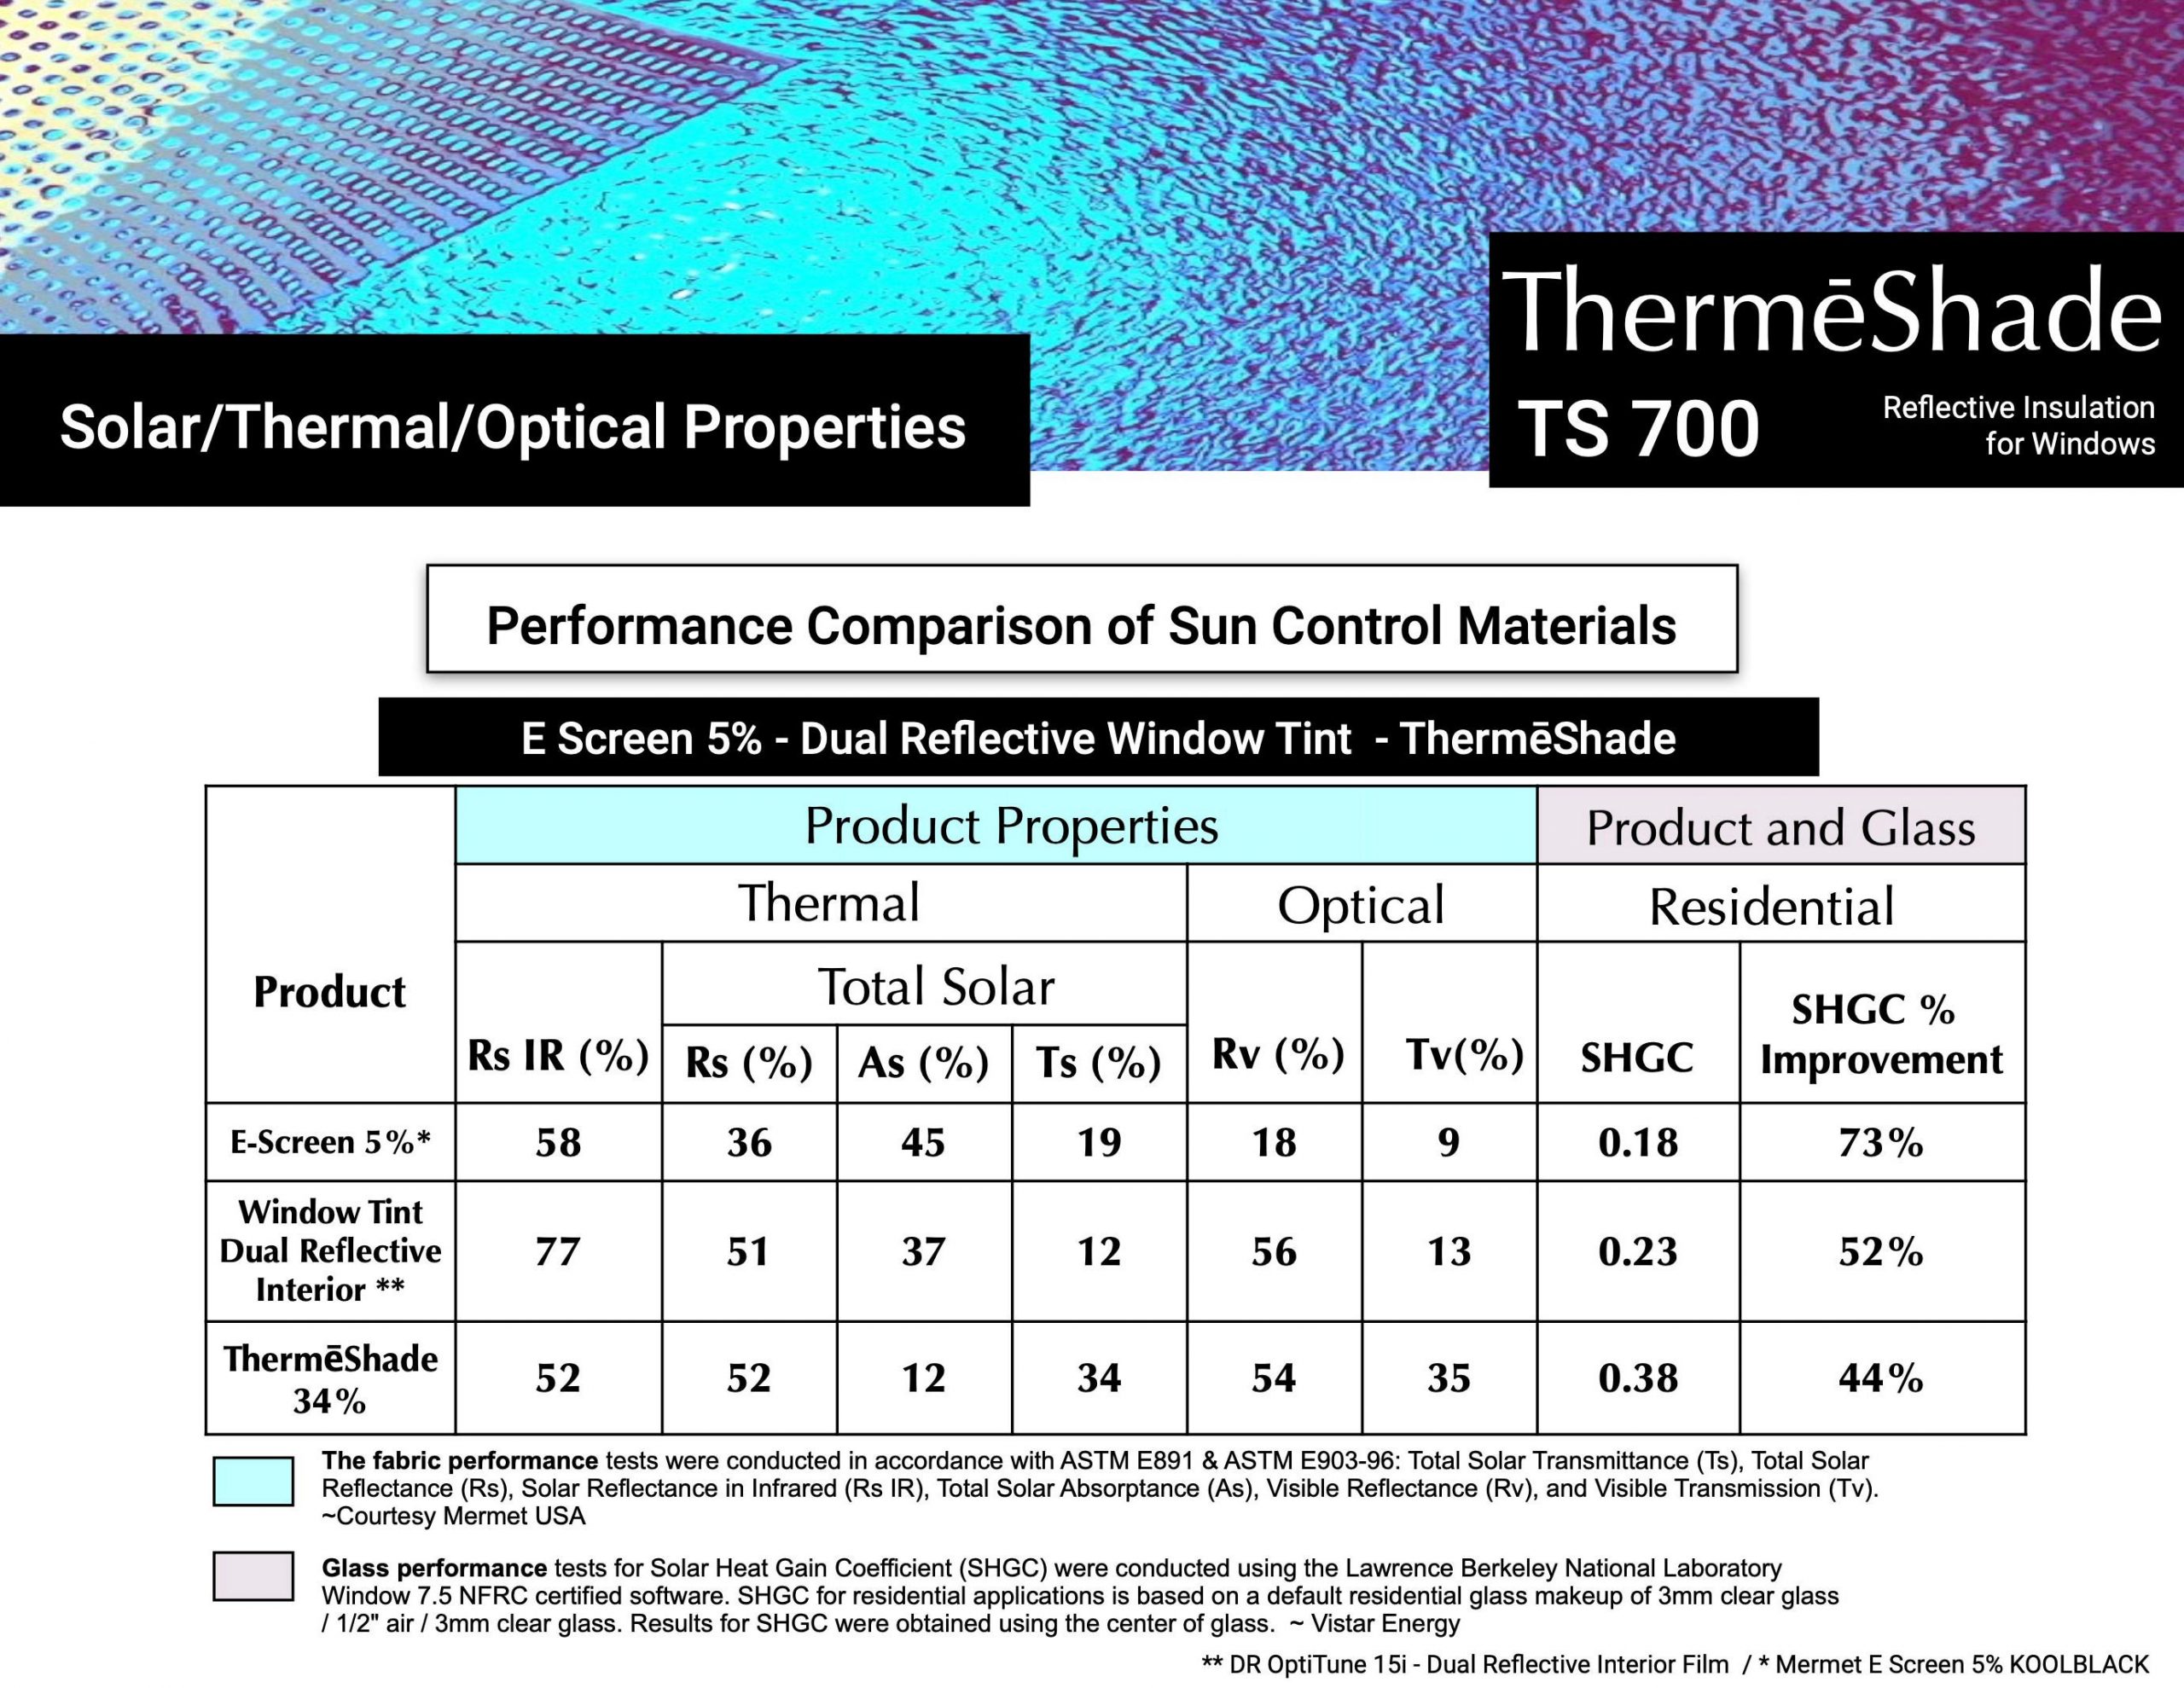 ThermeShade TS 700 Reflective Insulation for Windows Solar / Thermal / Optical Properties Performance Comparison of Sun Control Materials: E Screen 5% - Dual Reflective Window Tint - ThermēShade. The fabric performance tests were conducted in accordance with ASTM E891 & ASTM E903-96: Total Solar Transmittance (Ts), Total Solar Reflectance (Rs), Solar Reflectance in Infrared (Rs IR), Total Solar Absorptance (As), Visible Reflectance (Rv), and Visible Transmission (Tv). ~Courtesy Mermet USA Glass performance tests for Solar Heat Gain Coefficient (SHGC) were conducted using the Lawrence Berkeley National Laboratory Window 7.5 NFRC certified software. SHGC for residential applications is based on a default residential glass makeup of 3mm clear glass / 1/2" air / 3mm clear glass. Results for SHGC were obtained using the center of glass. ~ Vistar Energy ** DR OptiTune 15i - Dual Reflective Interior Film / * Mermet E Screen 5% KOOLBLACK